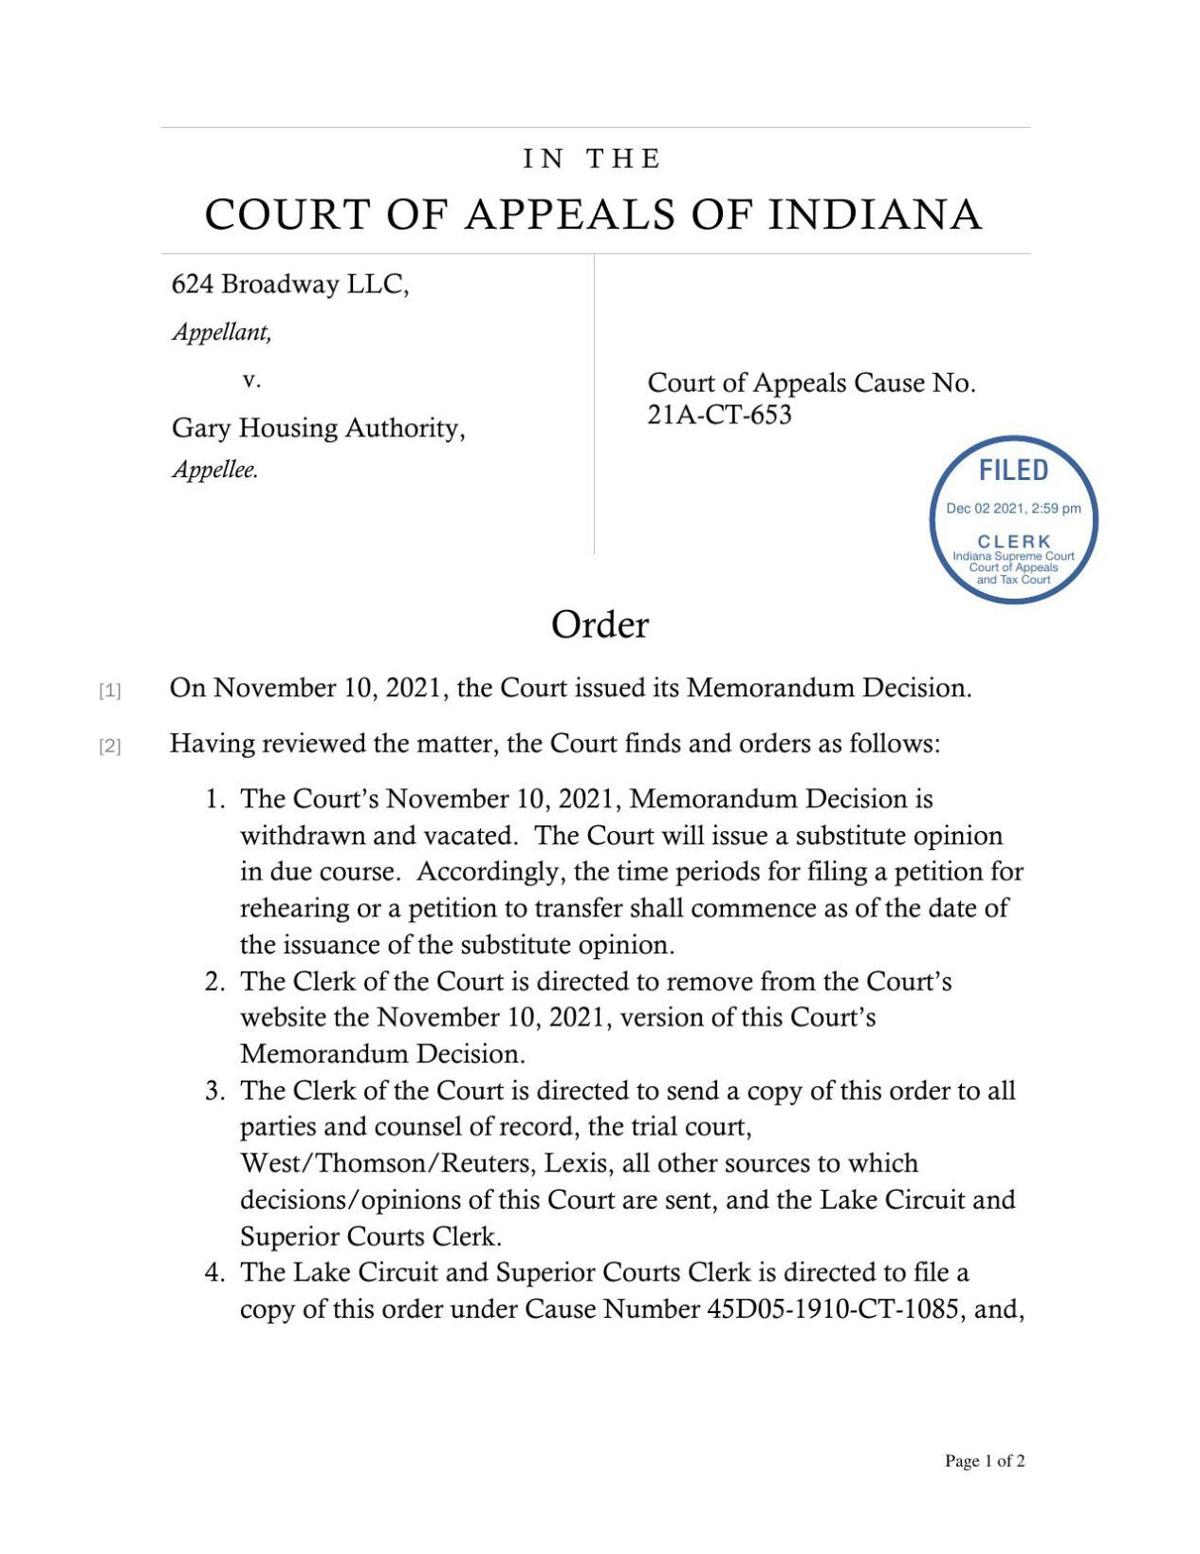 Indiana Court of Appeals order in 624 Broadway v. Gary Housing Authority